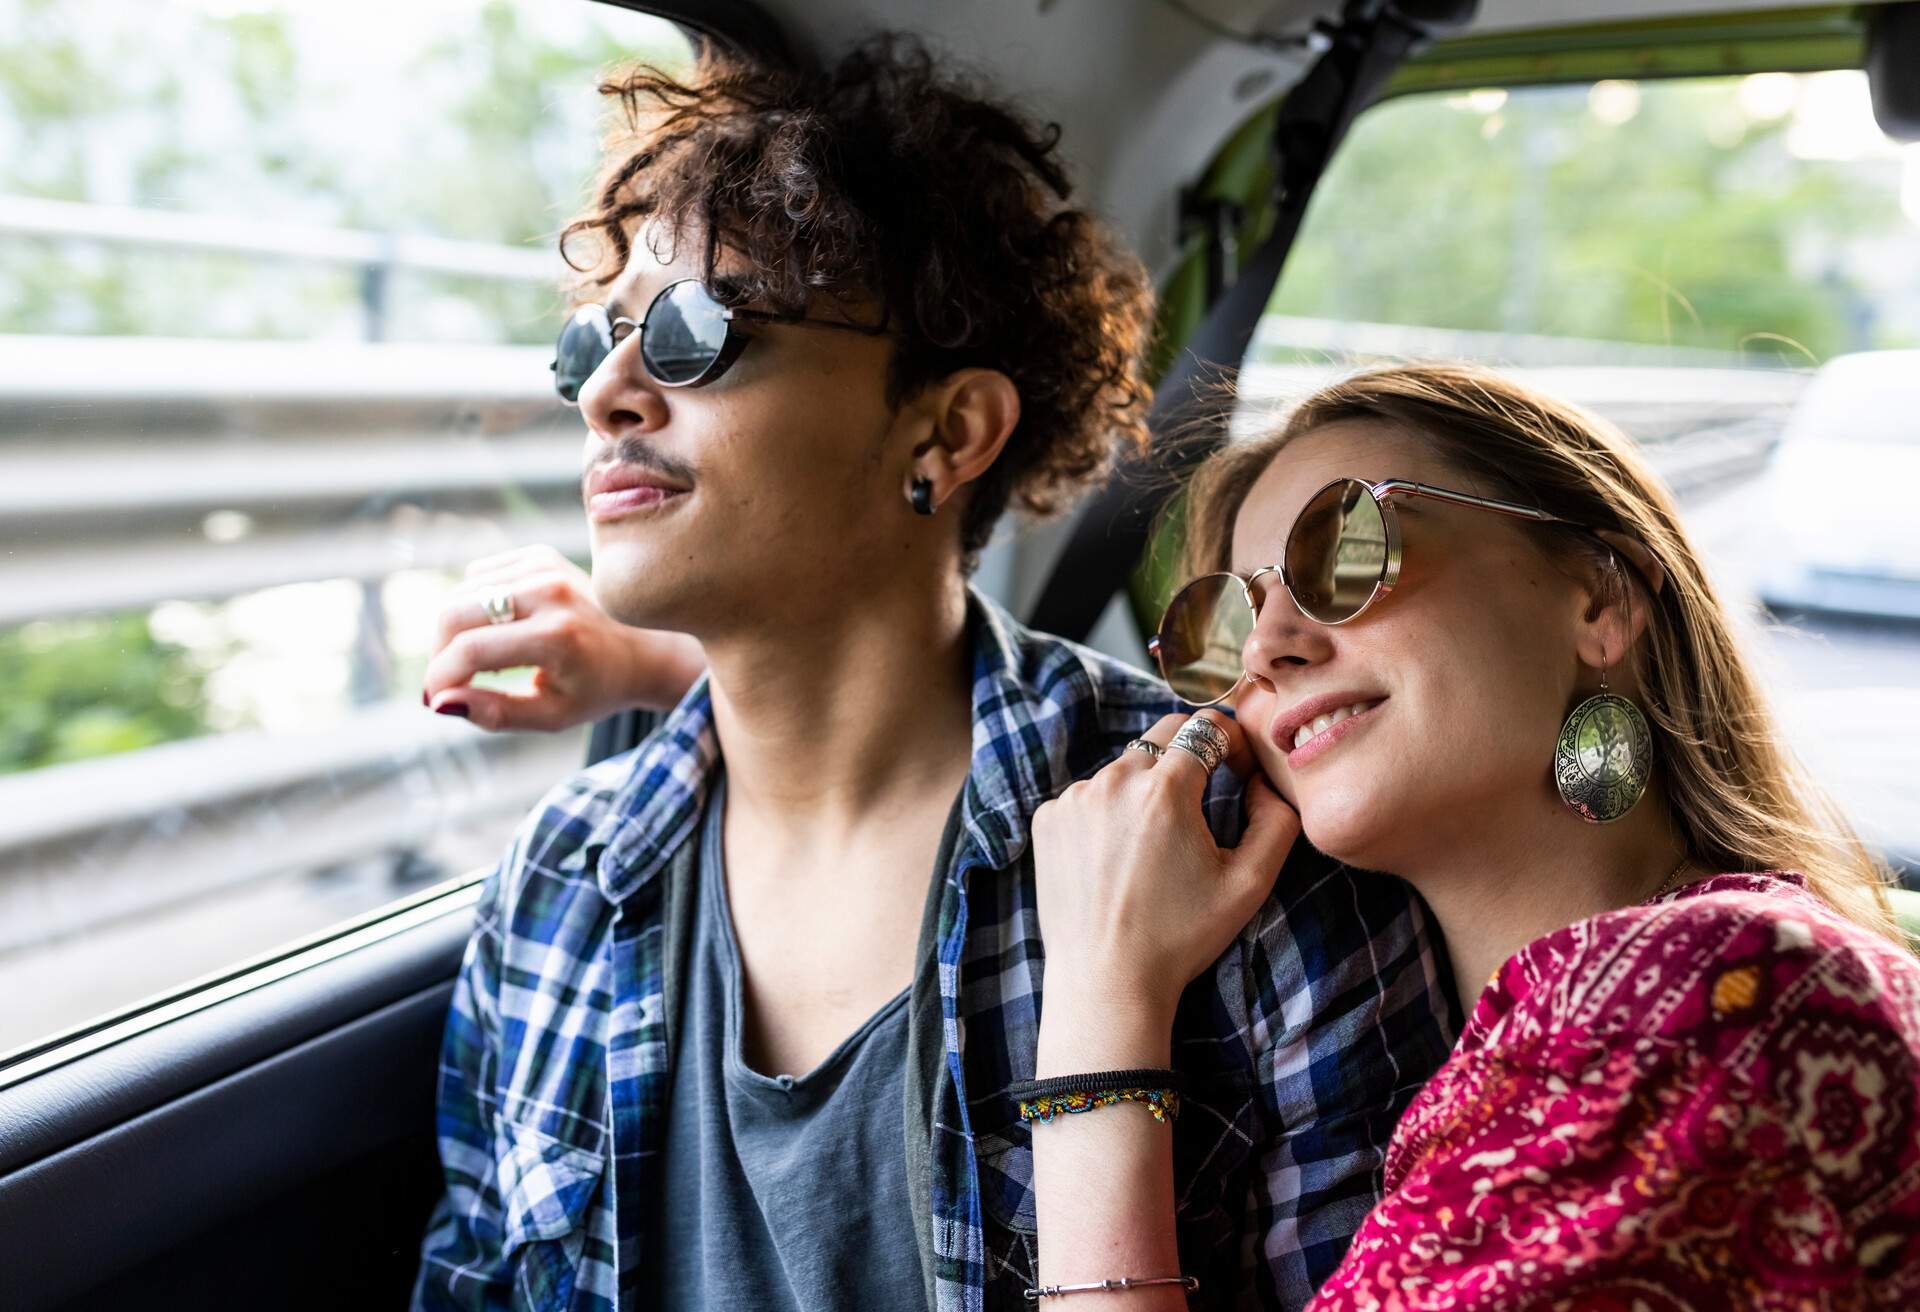 A sweet young couple wearing sunglasses rides on a Uber cab.